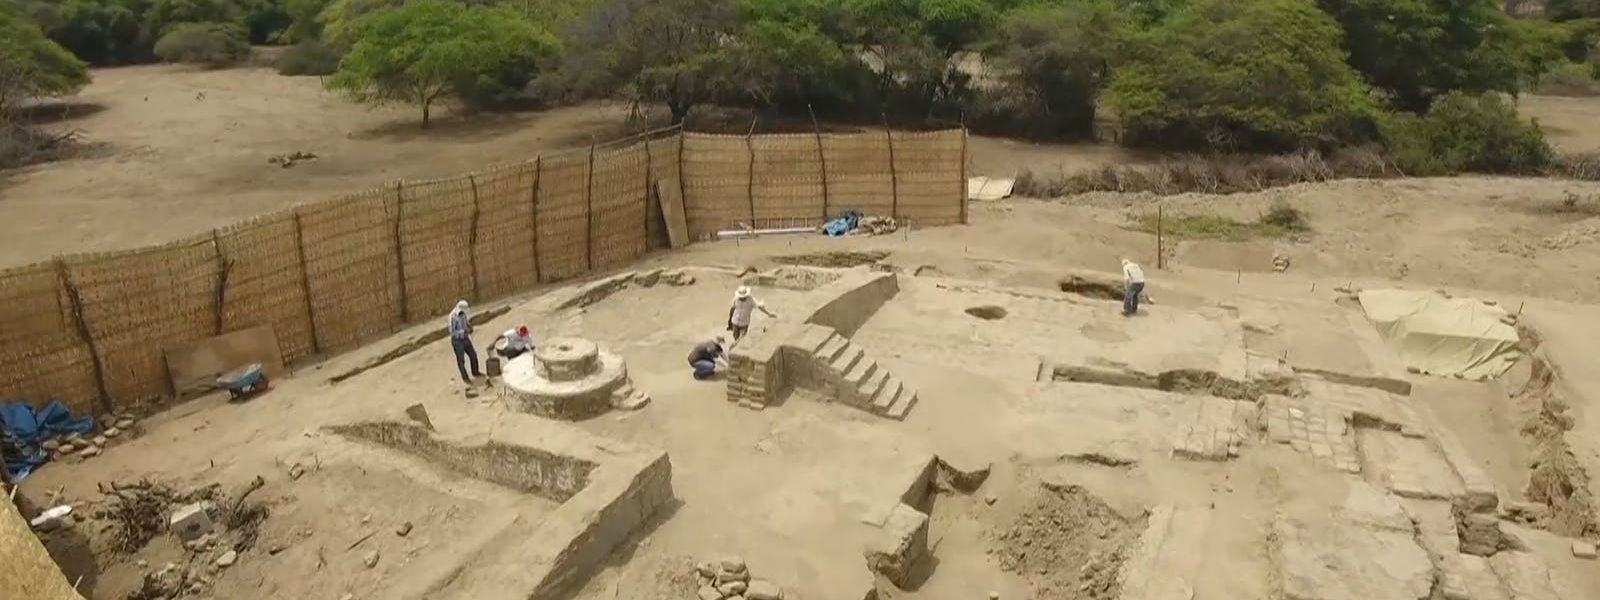 Archaeologists in Peru unearth ancient mural 